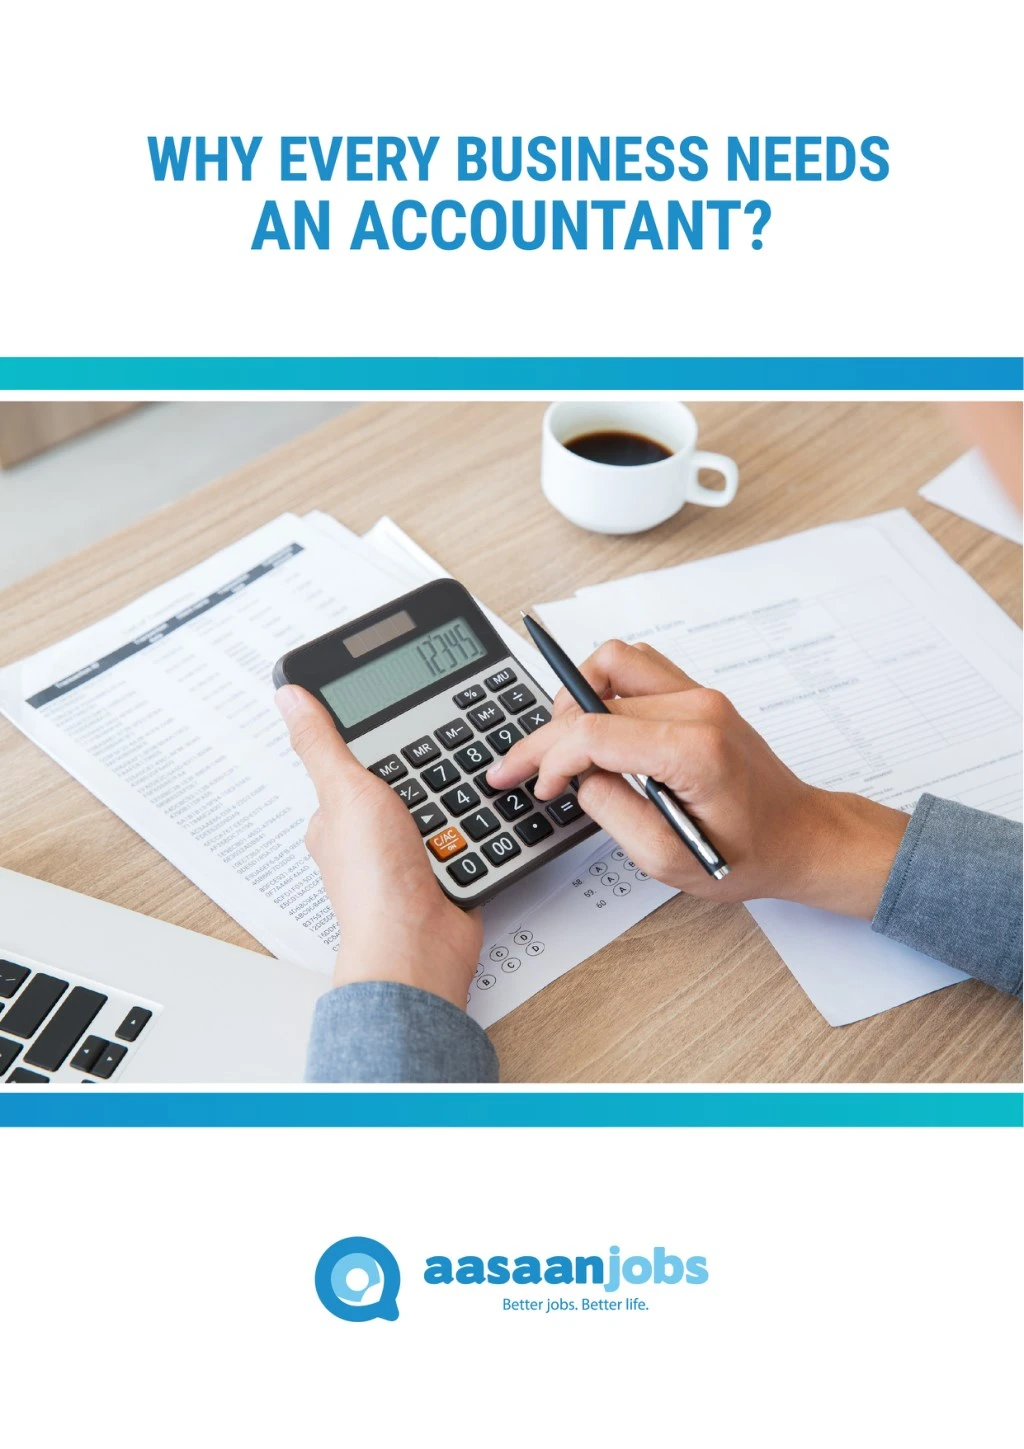 Small Business Accountant